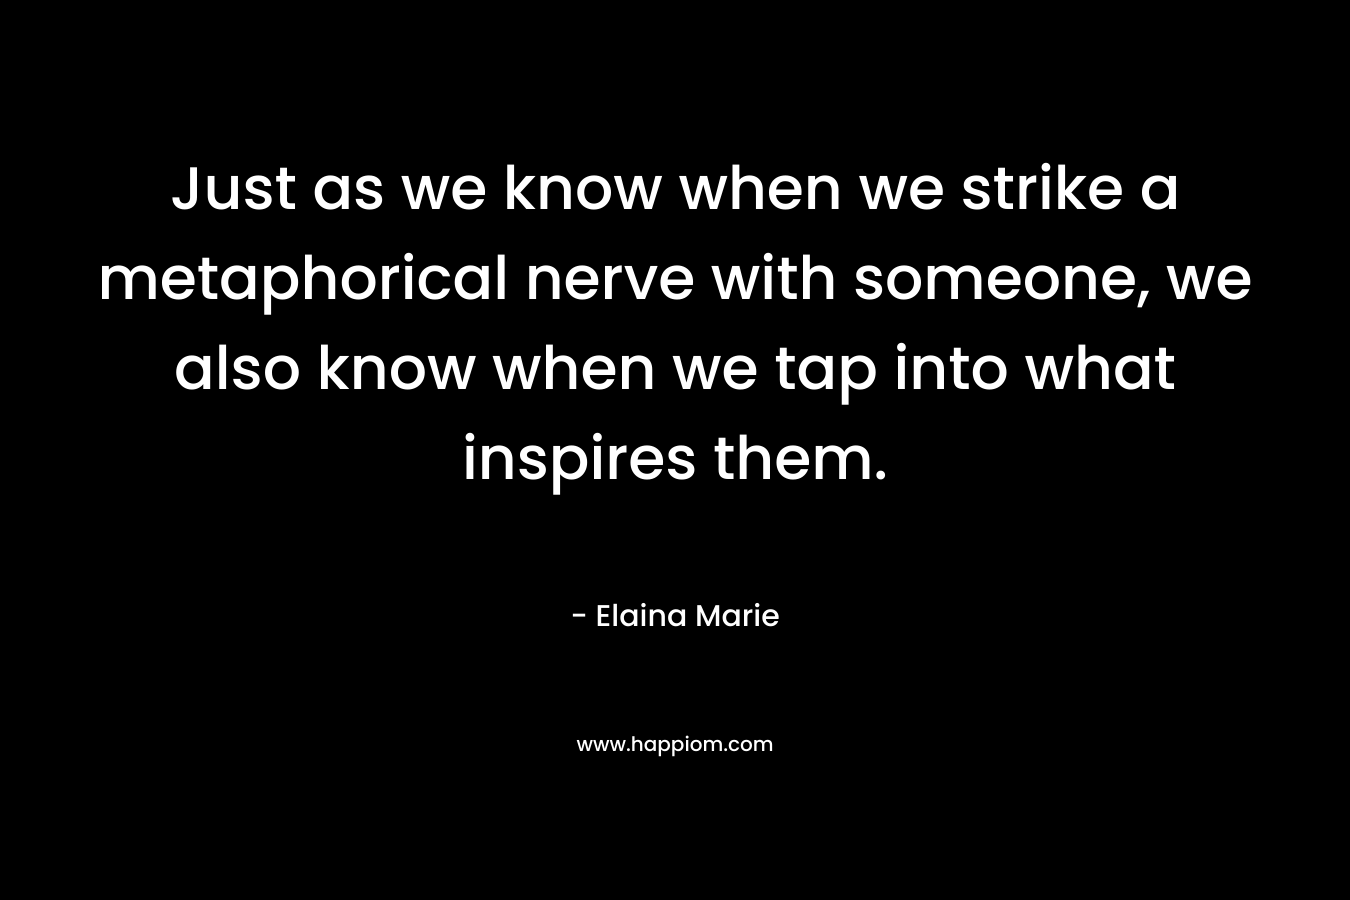 Just as we know when we strike a metaphorical nerve with someone, we also know when we tap into what inspires them. – Elaina Marie